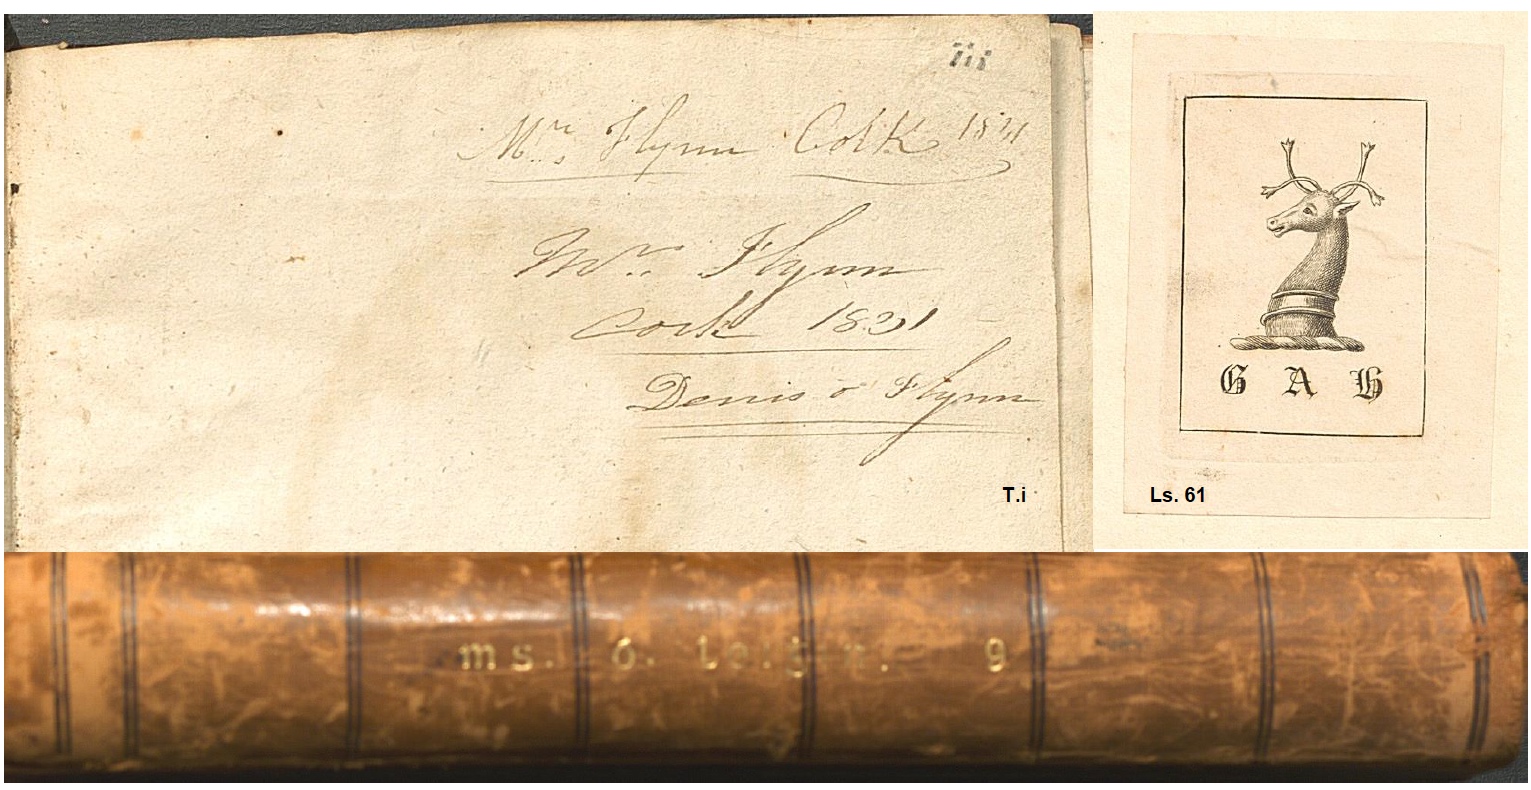 Three images: Top left is a signature on a flyleaf from a Mr Flynn Cork 1831. On the top right is a bookplate for a GAH. The bookplate shows a deer with antlers. On the bottom are the words 'Ms O Leighin 9' in gold-tooling on the spine of the leather bound manuscript. 